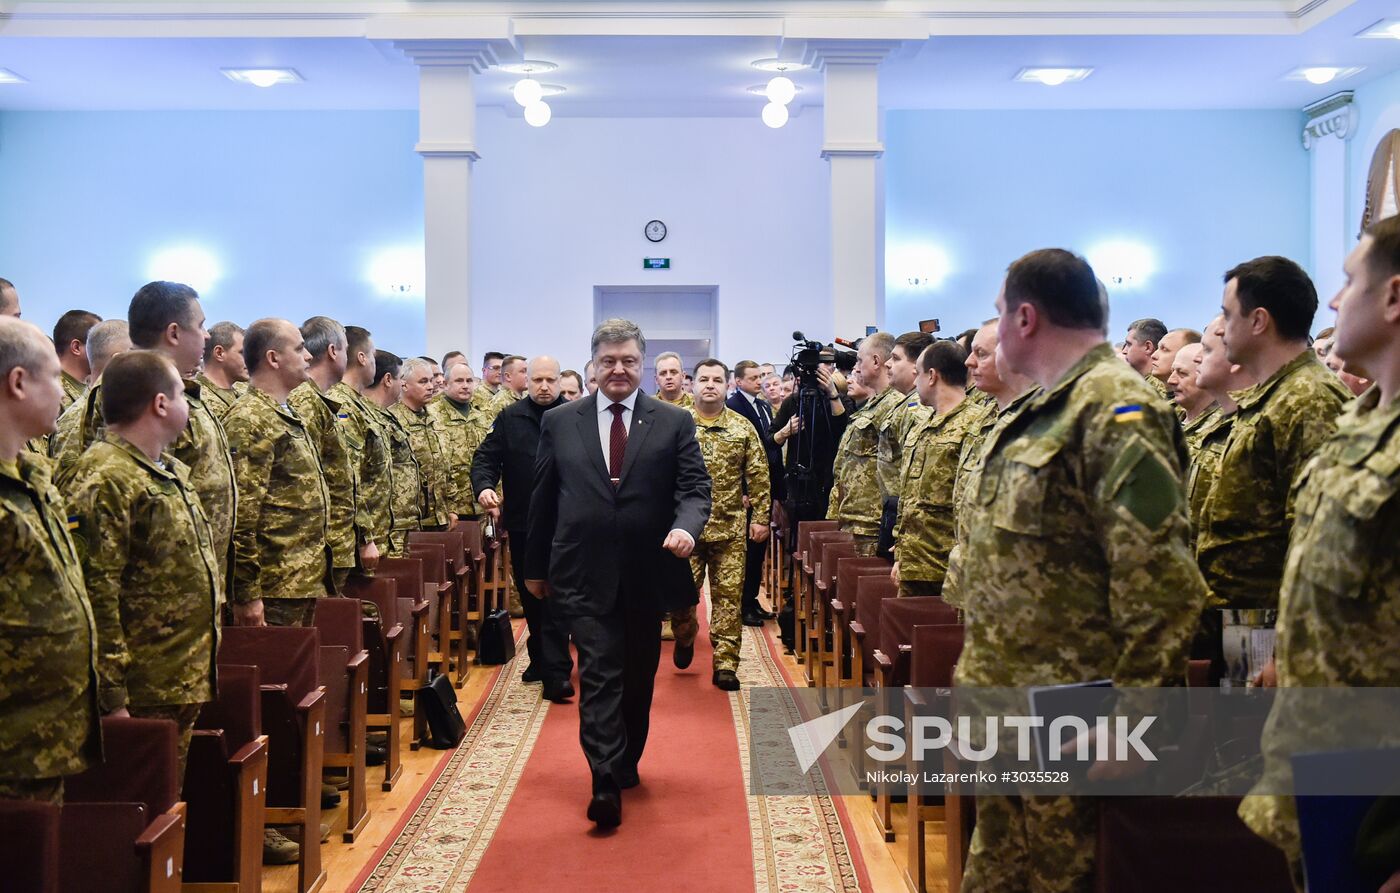 General assembly of the Ukrainian Armed Forces command personnel